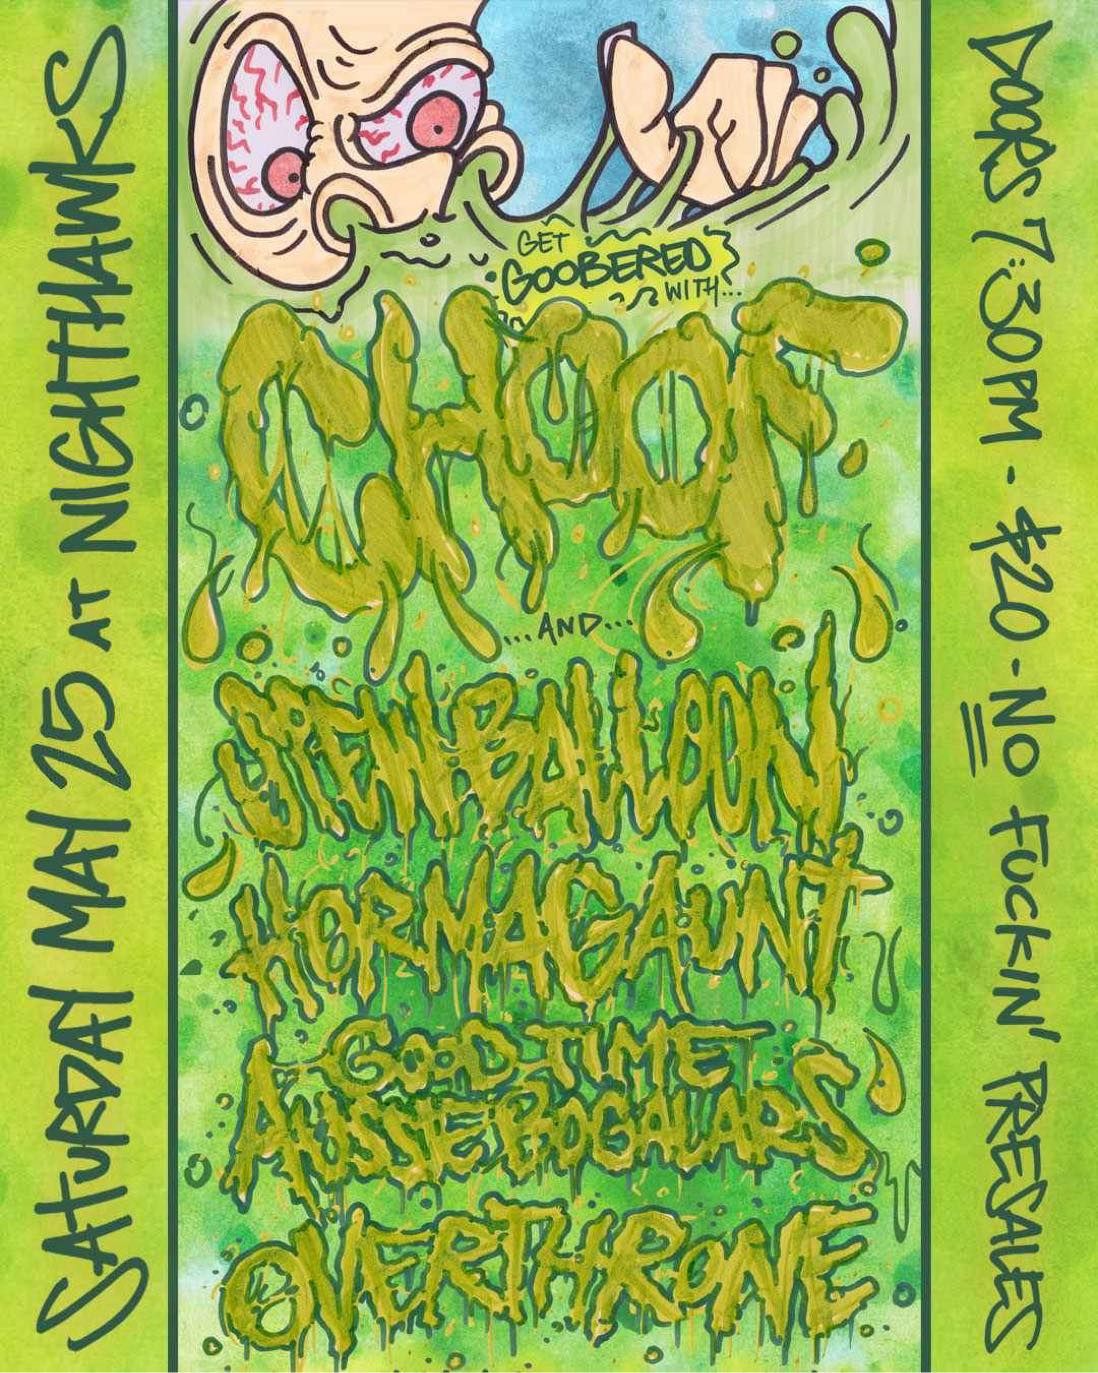 CHOOF - NIGHTHAWKS w\/ Hormagaunt, Spew Balloon, Good Time Aussie Bogalars and Overthrone